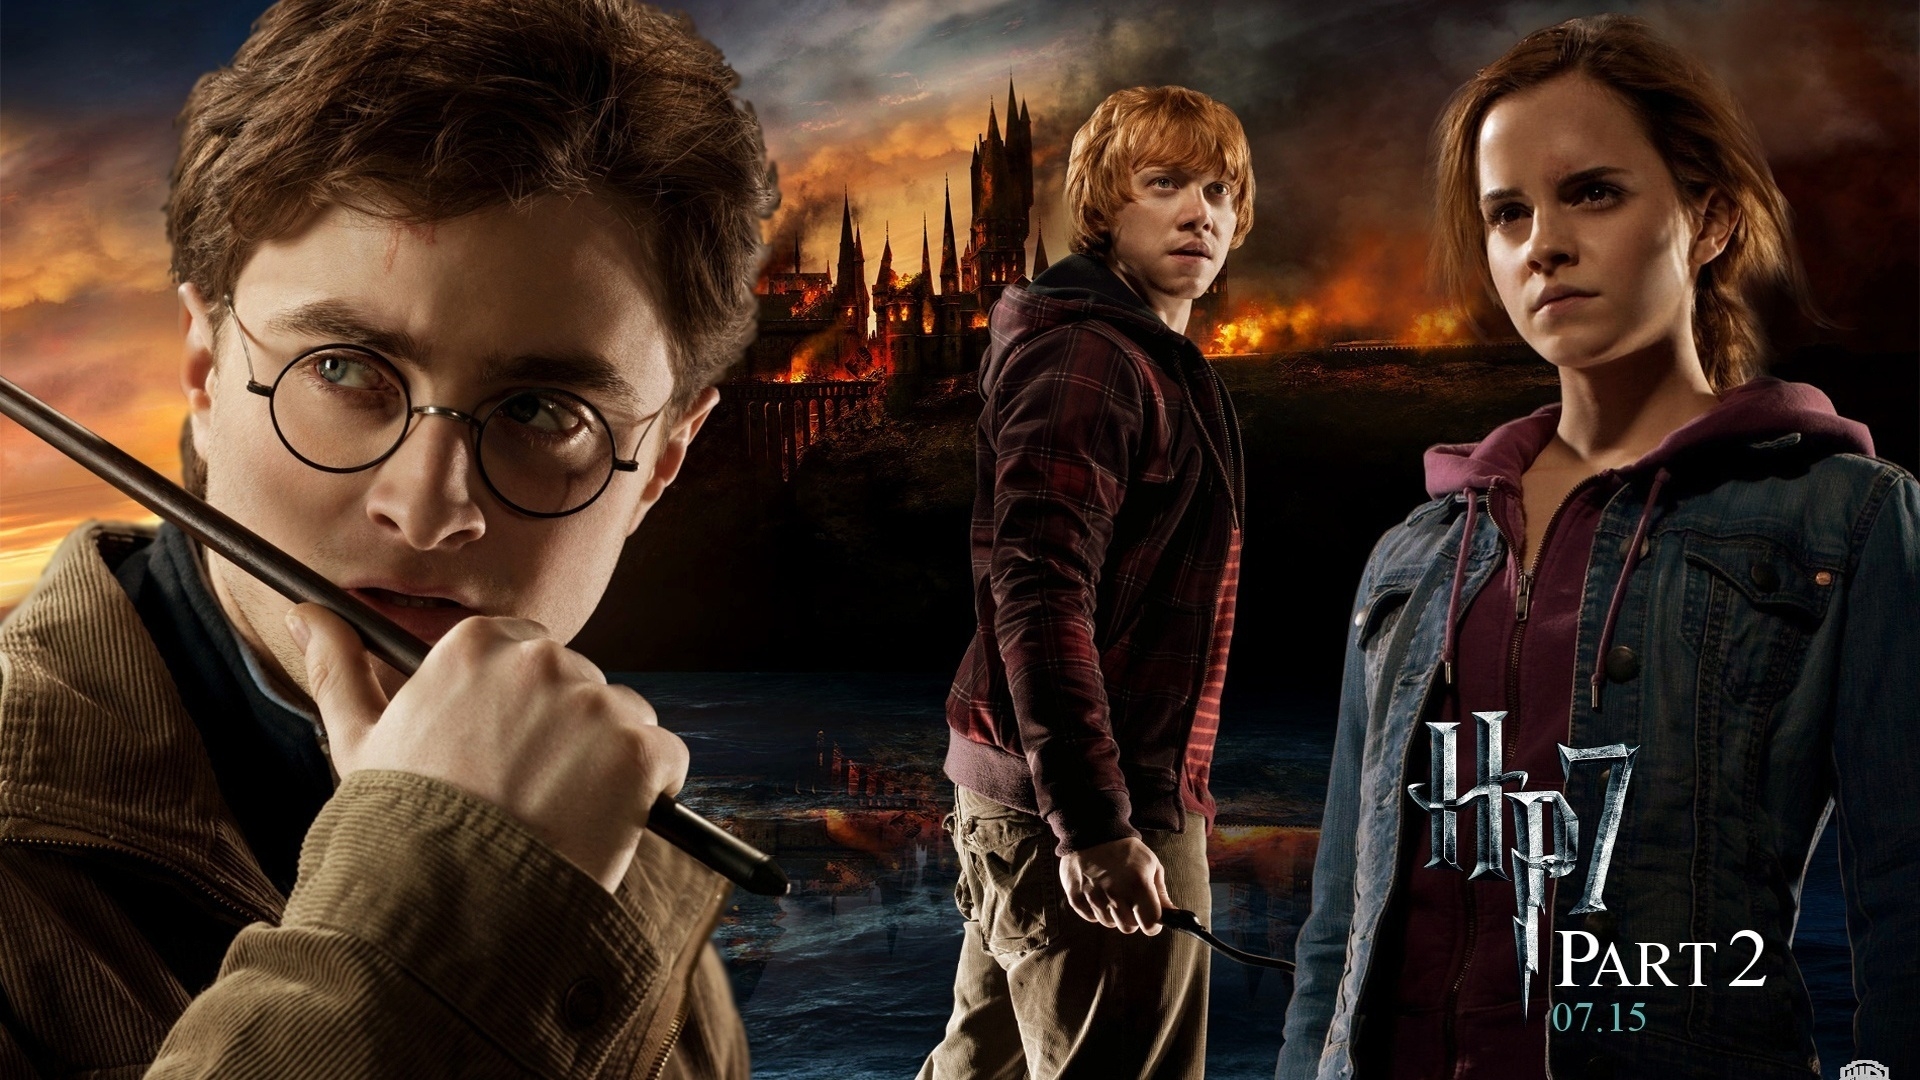 Harry Potter Deathly Hallows Part II for 1920 x 1080 HDTV 1080p resolution